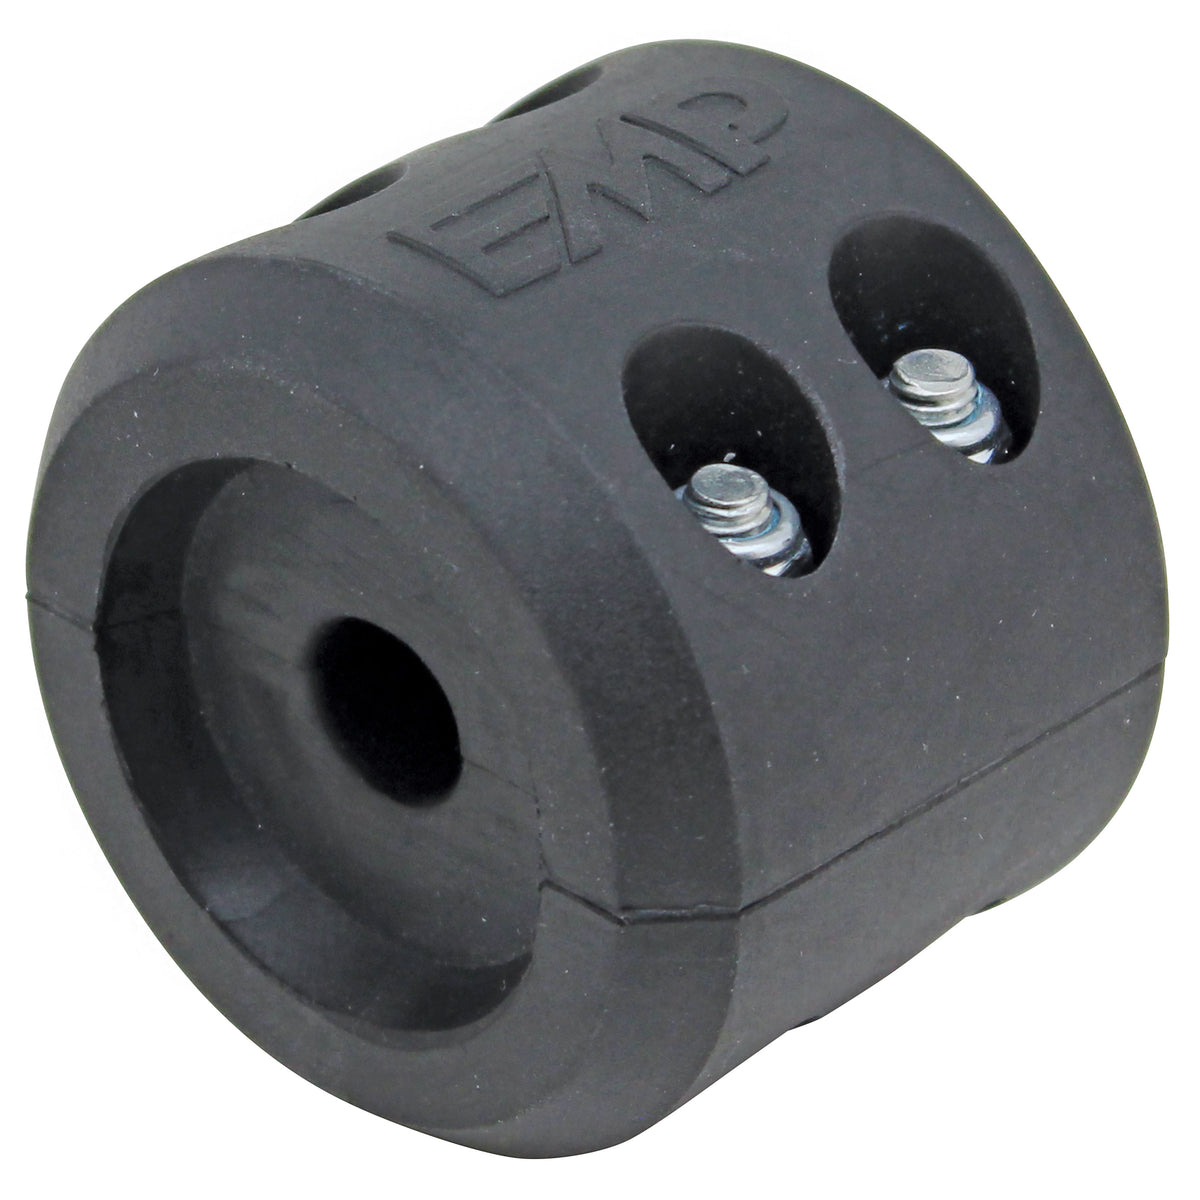 Extreme Max 5600.3192 2-Piece Quick-Install Hook Stopper & Line Saver for ATV/UTV Winches - Each